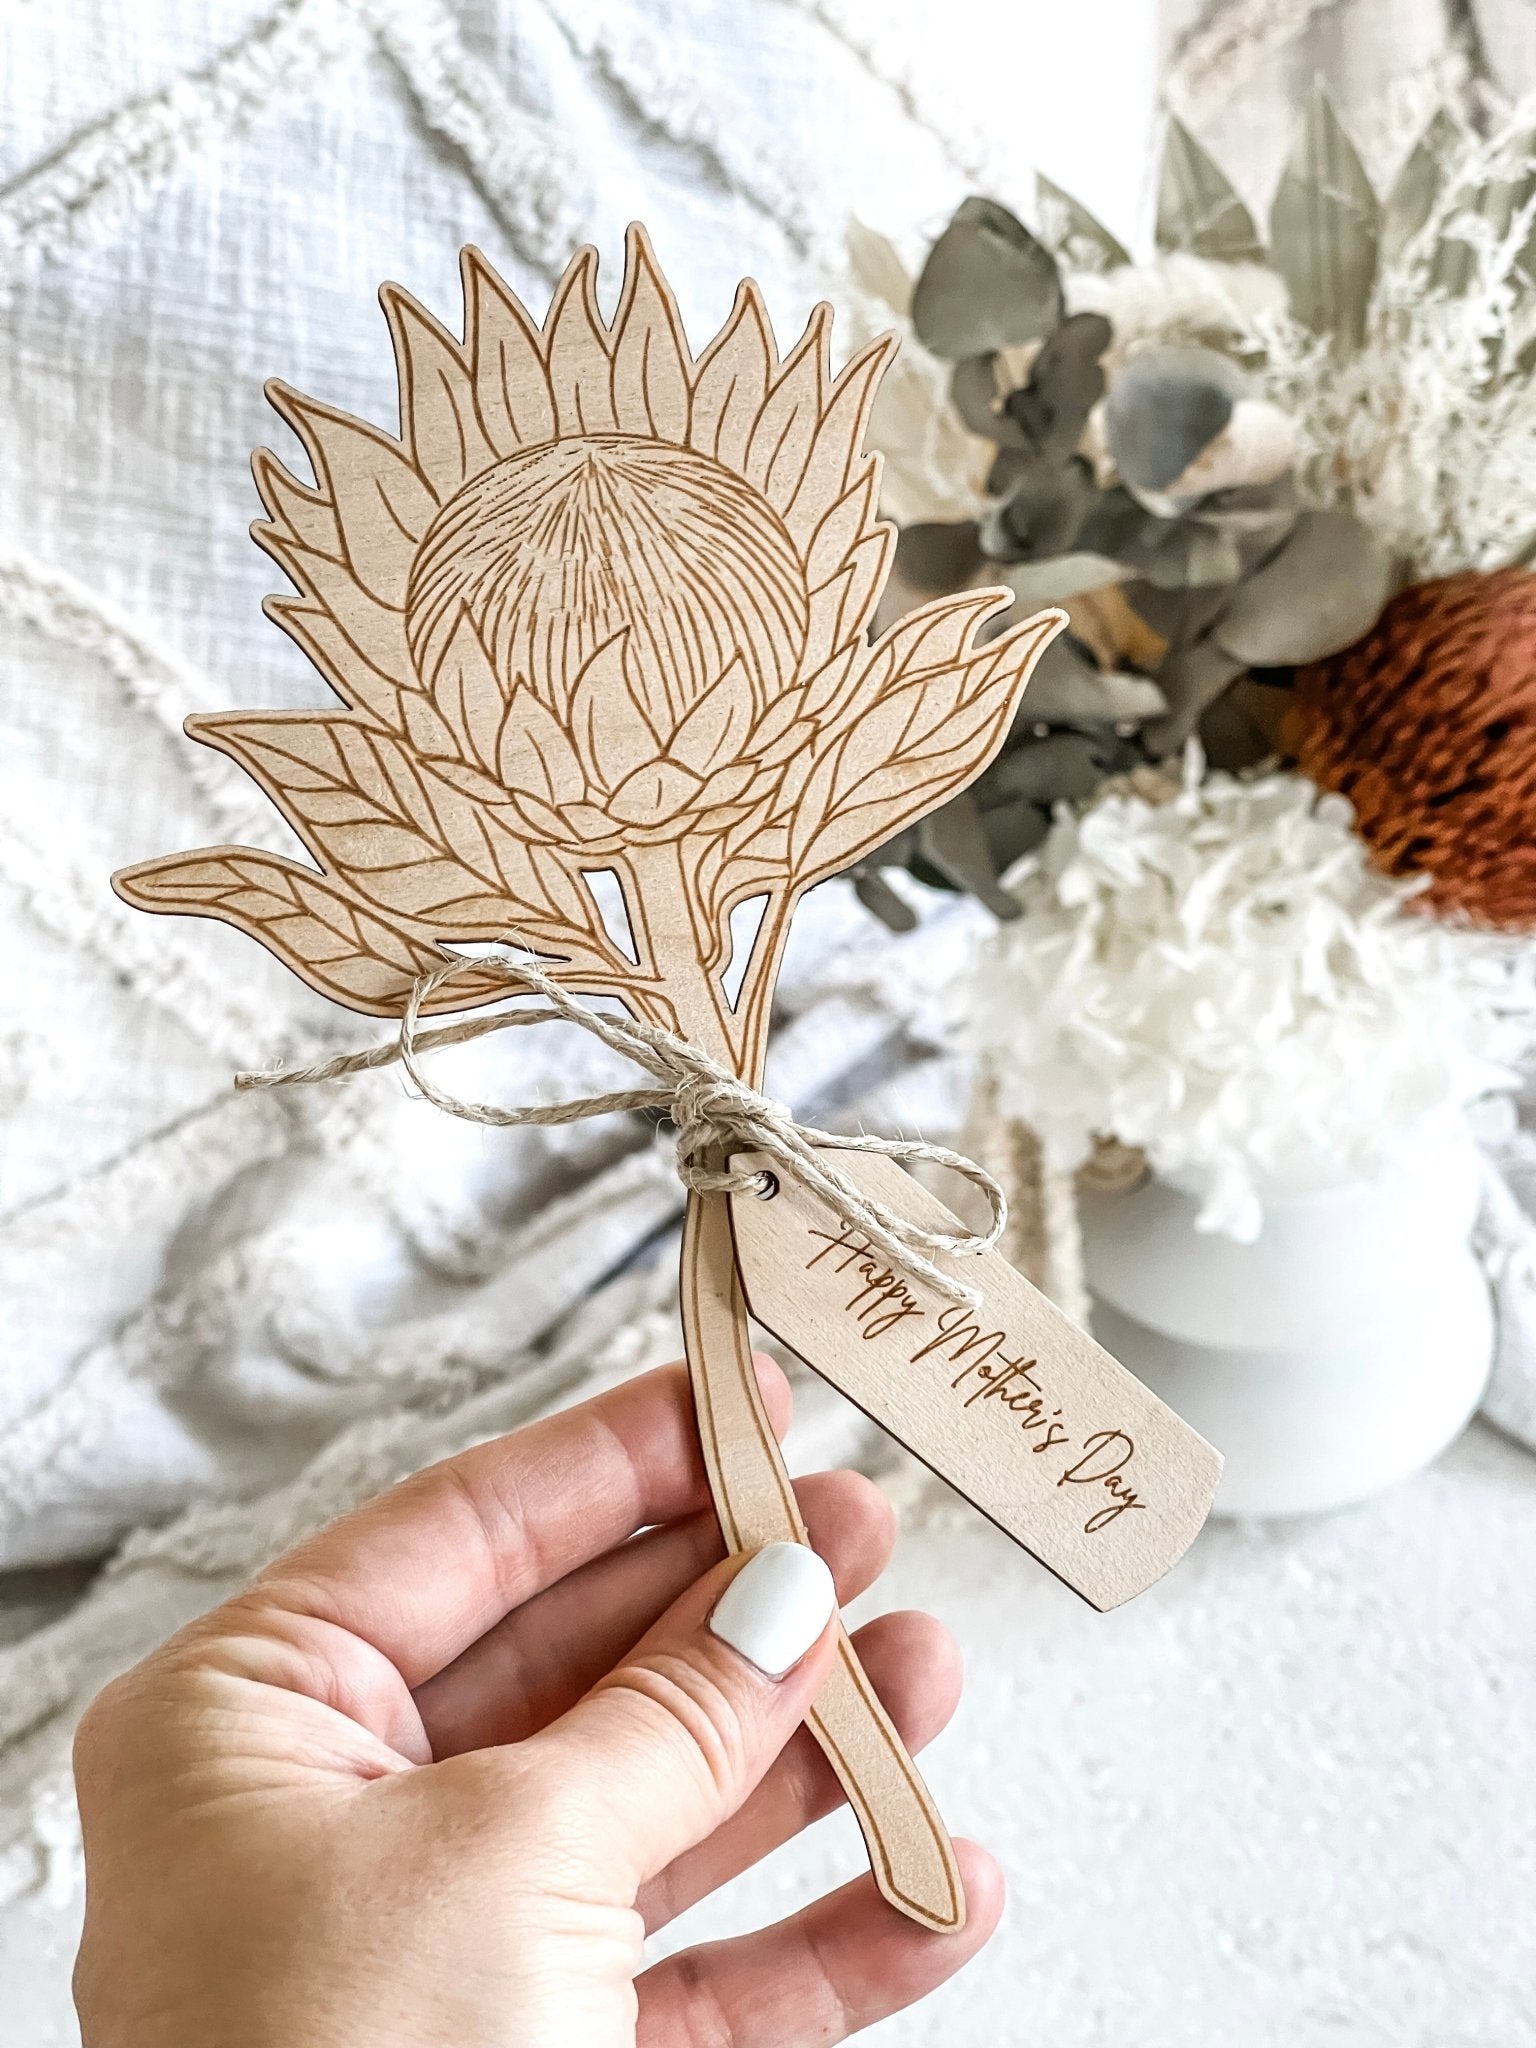 King Protea Flower with Tag - The Humble Gift Co.